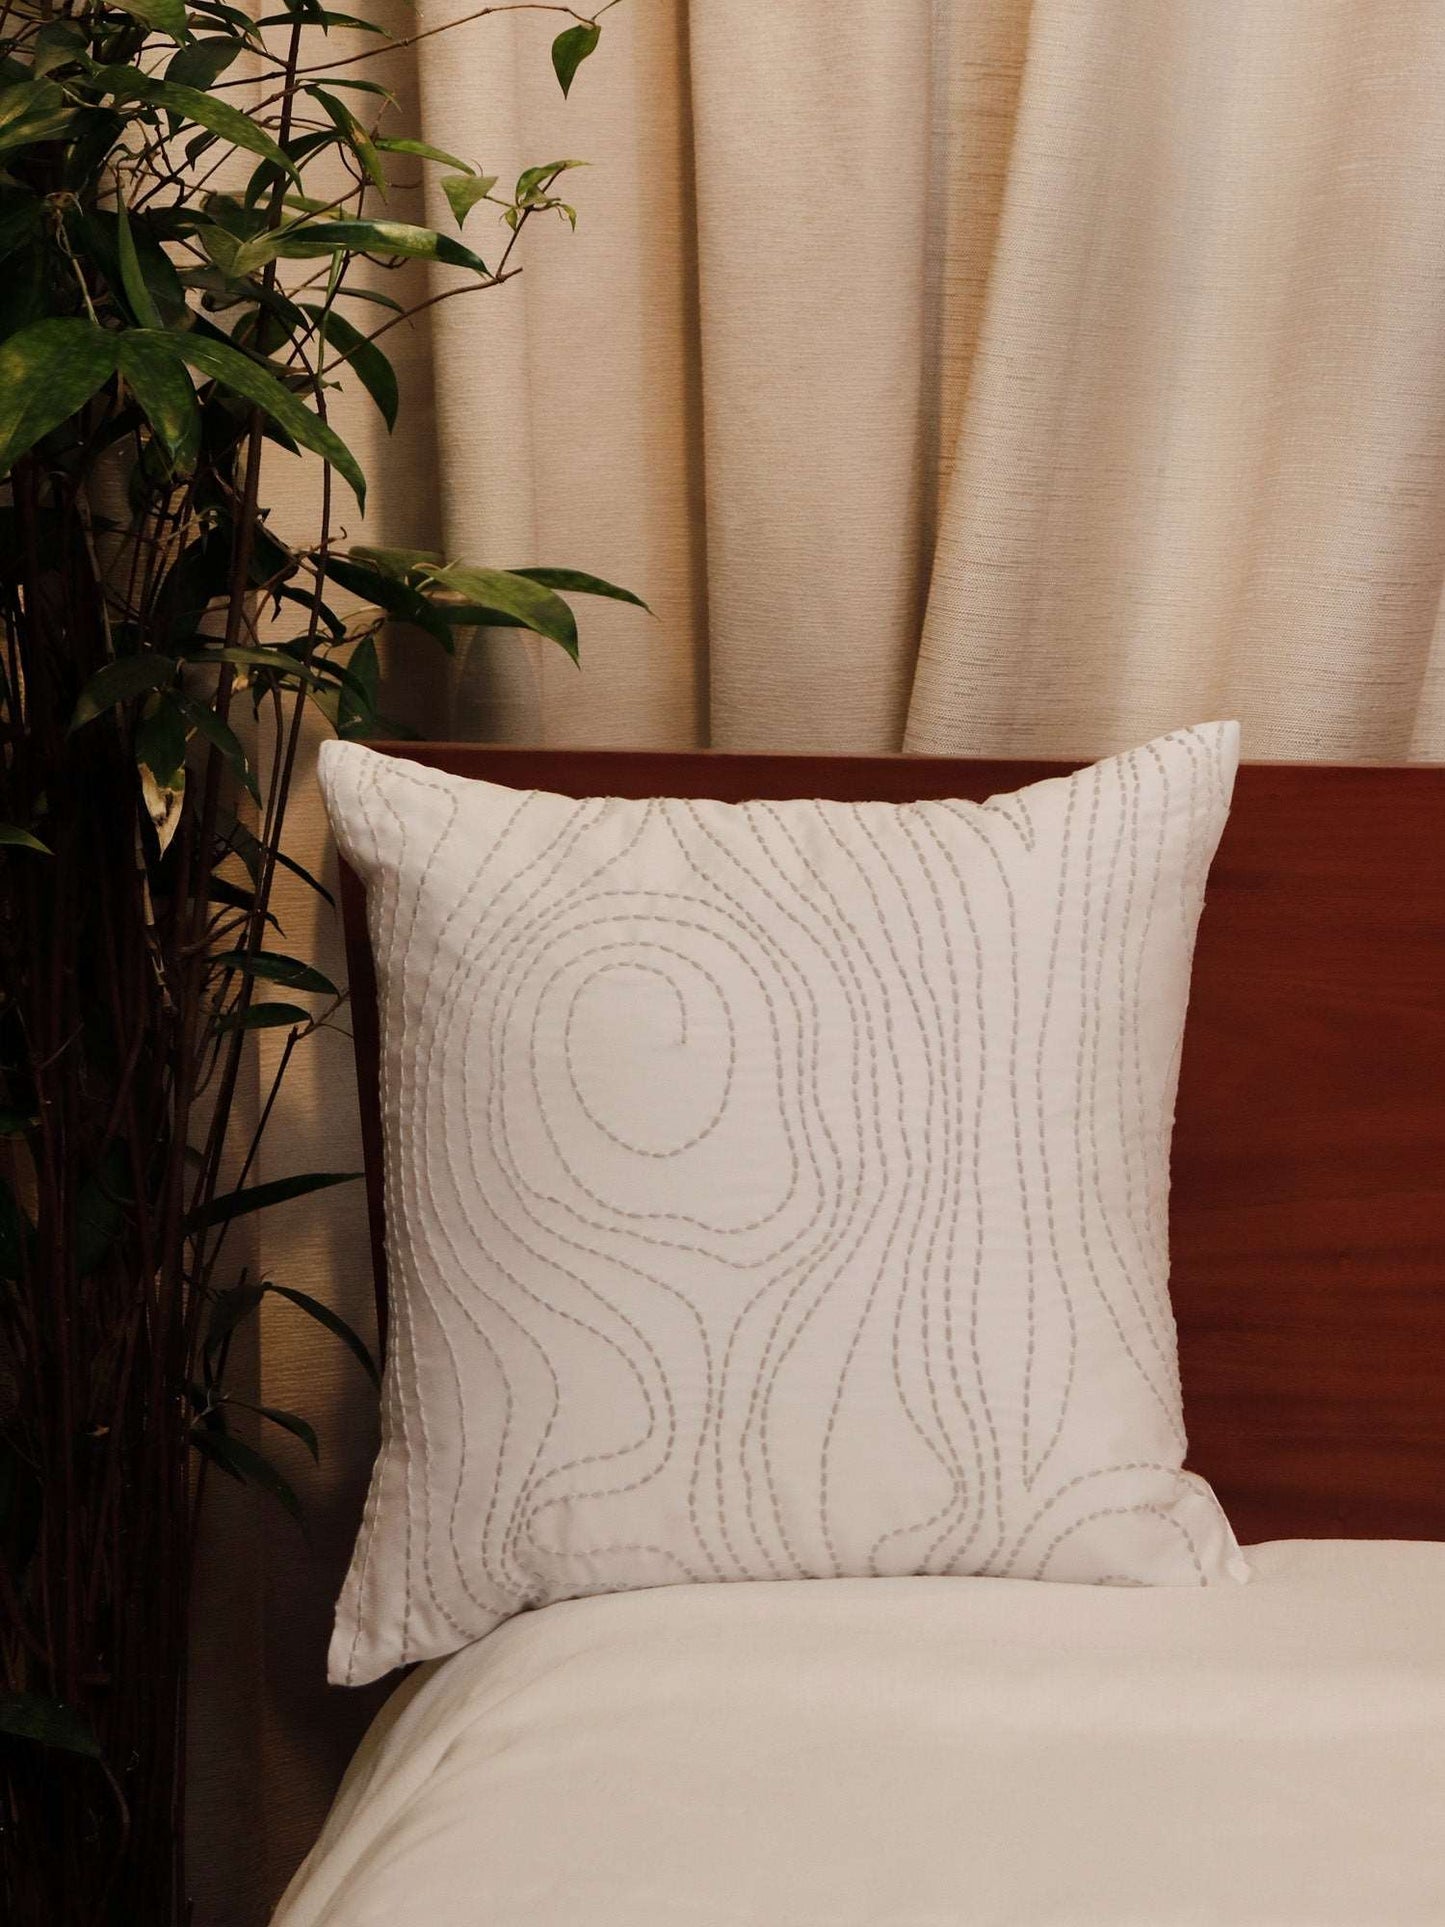 Cushion Cover 100% Cotton 520TC Hand Embroidered White -  16X16